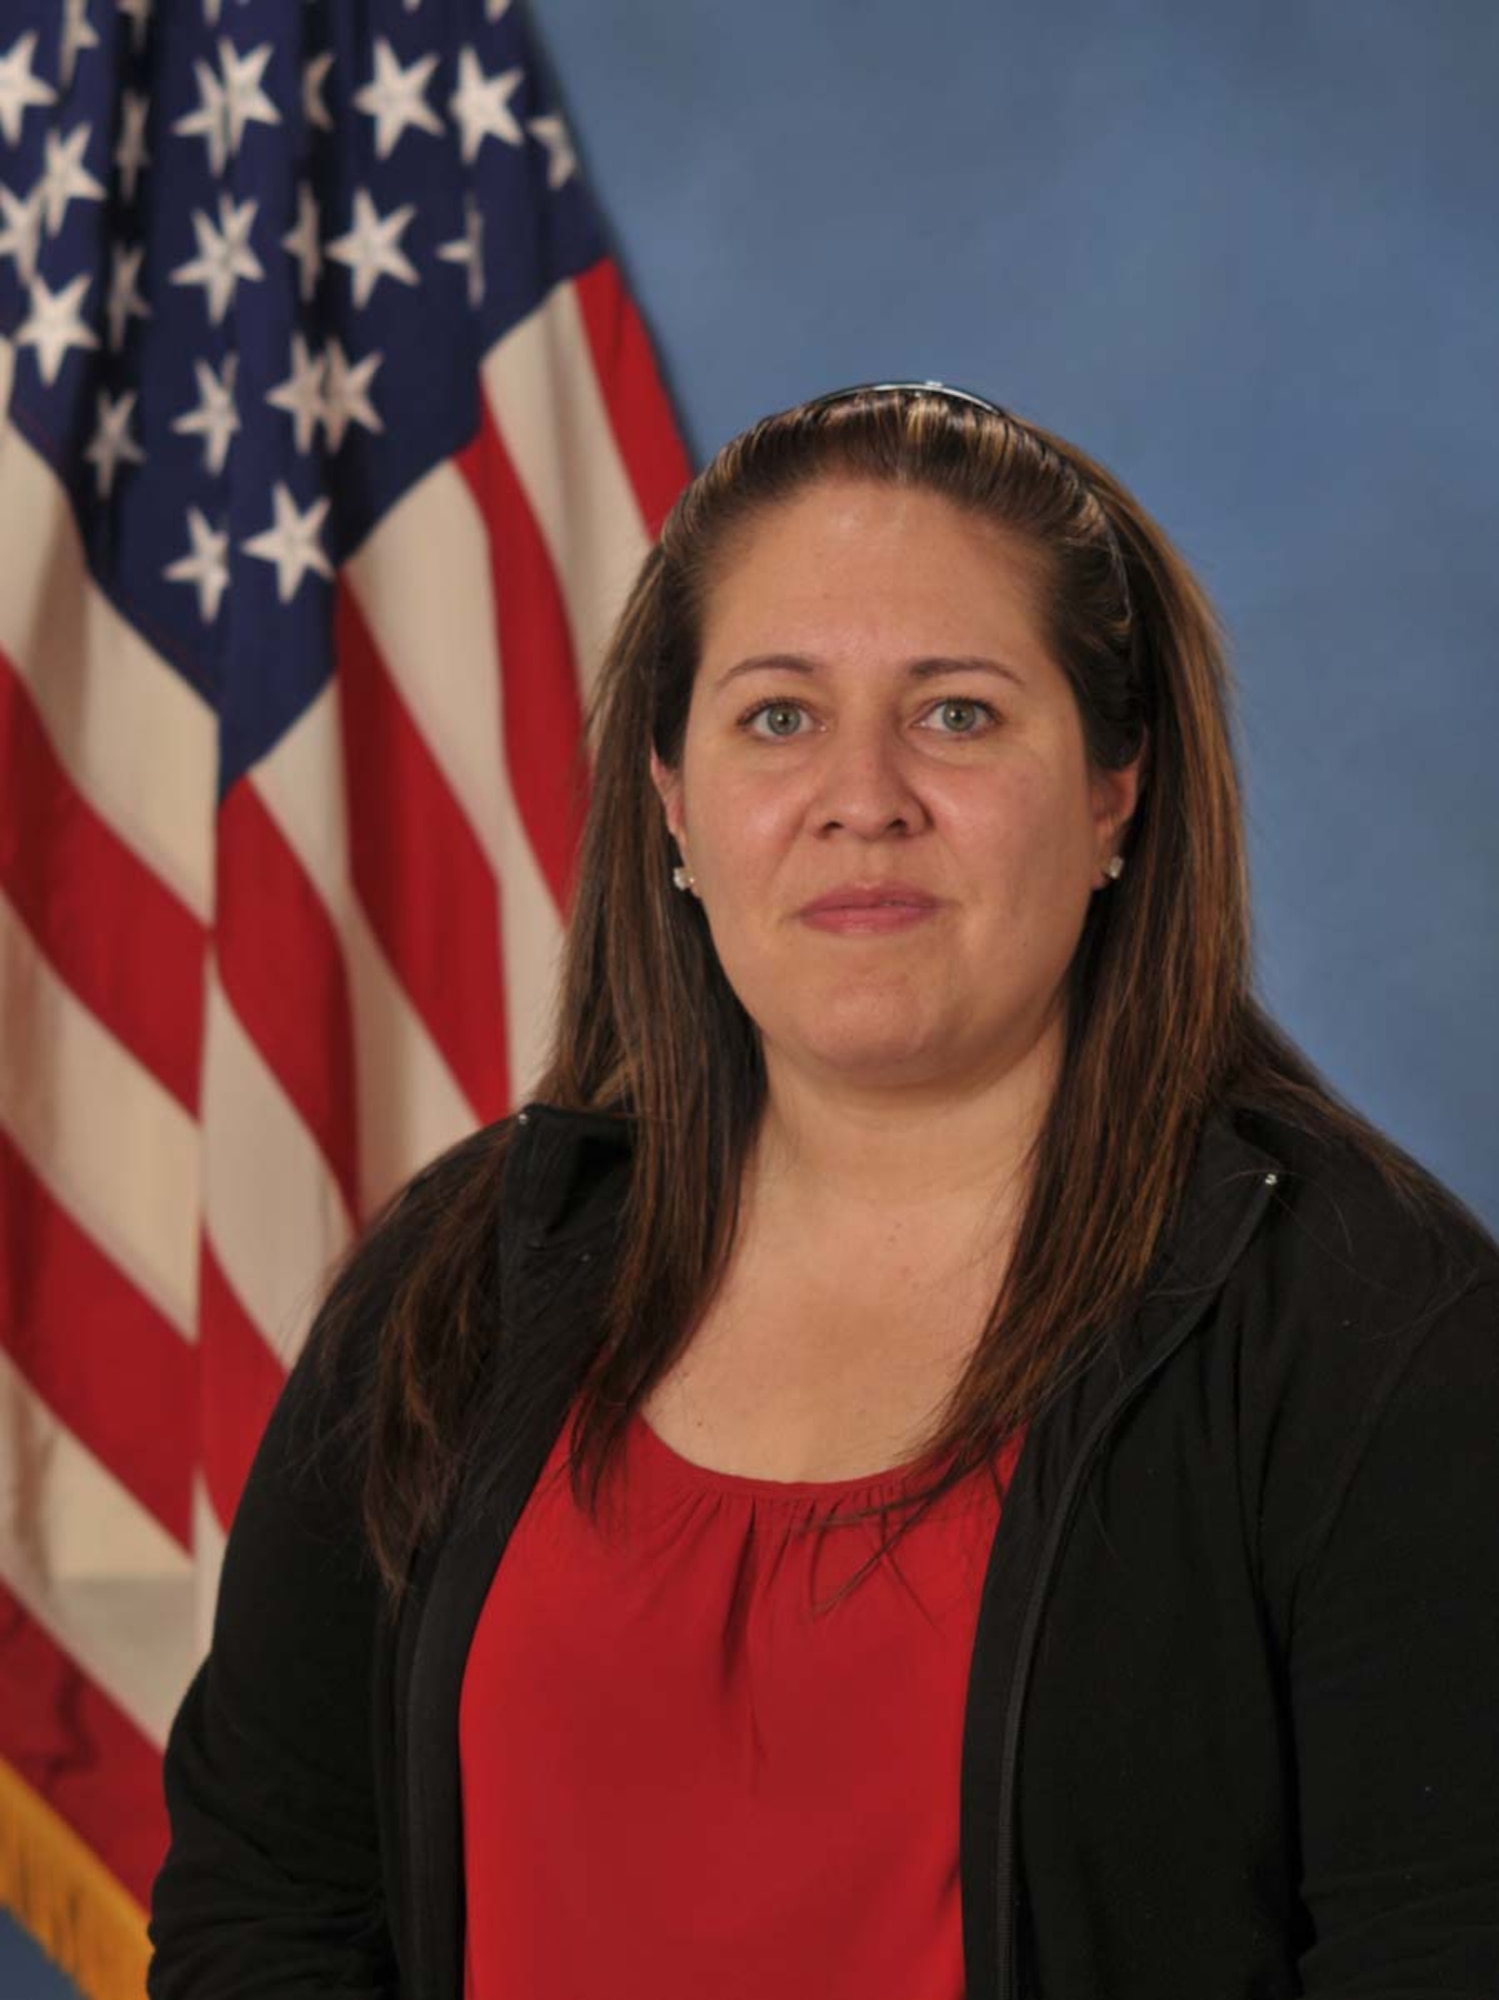 Ms. Liza Ojeda-Agushi from the Headquarters Air Force Operational Test and Evaluation Center's Manpower, Personnel and Training Directorate at Kirtland AFB, N.M., is the 2009 AFOTEC Category III Civilian of the Year.